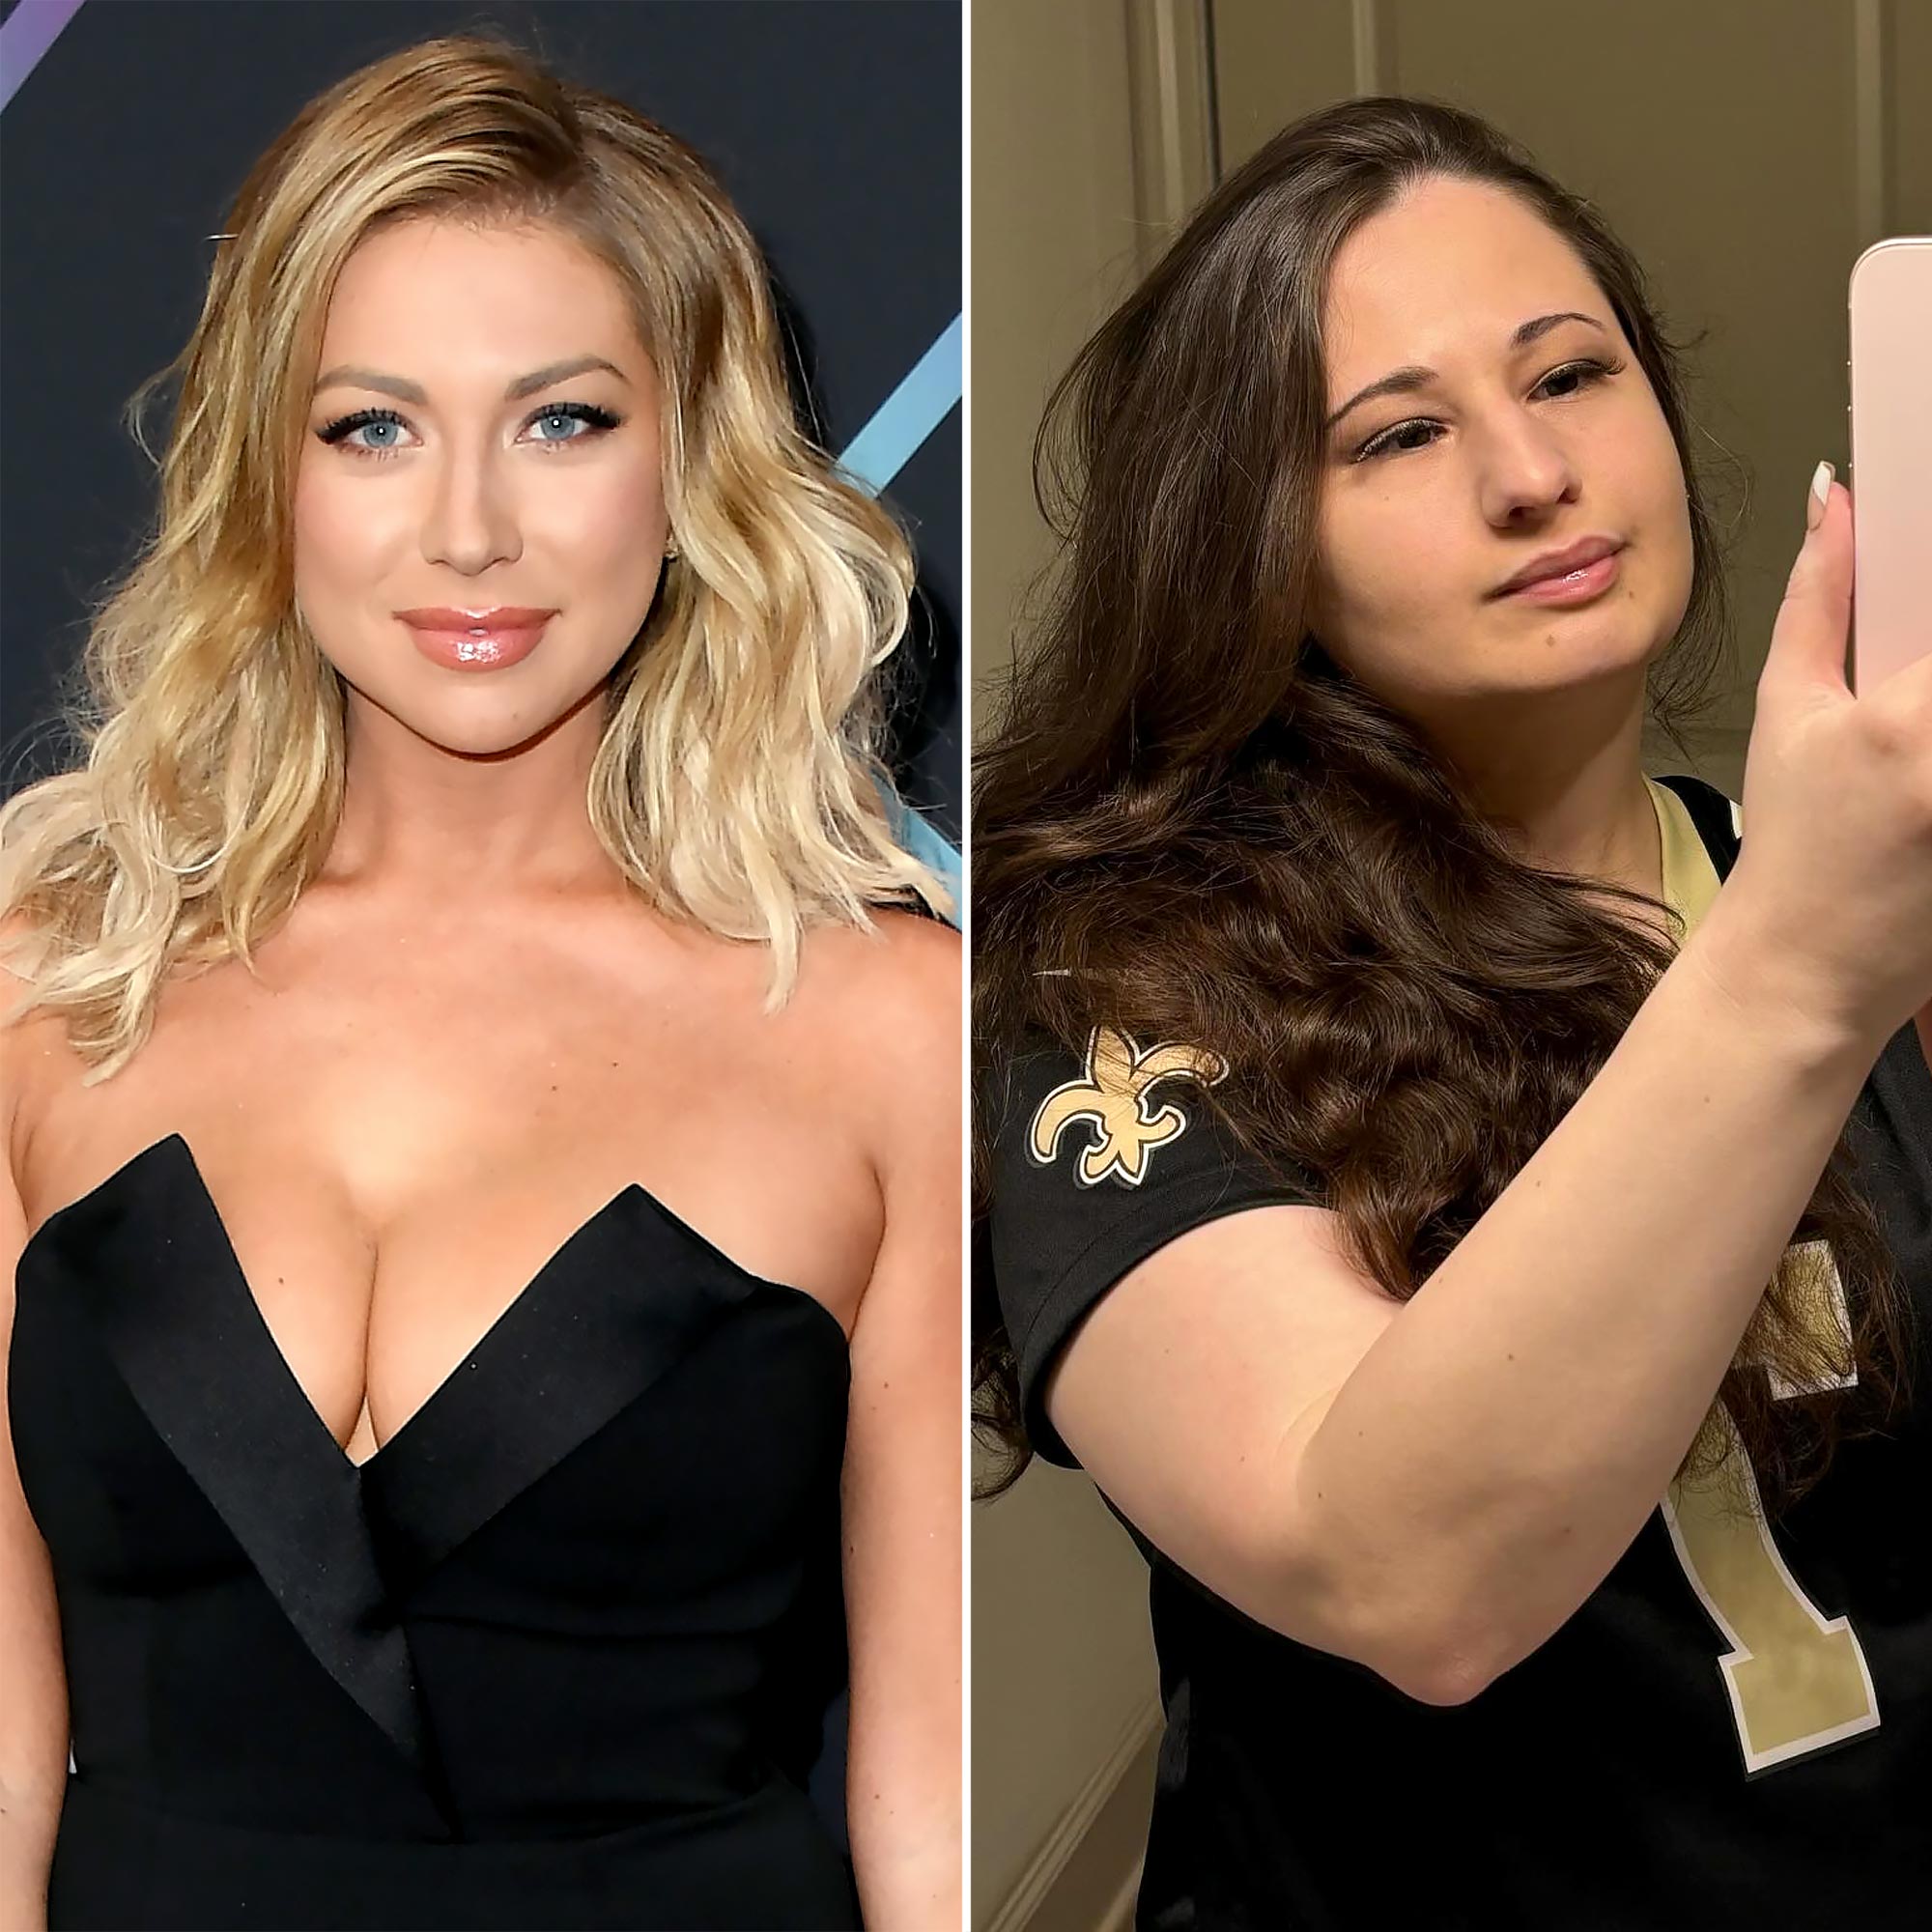 Stassi Schroeder Is ‘Unwell’ Over News She Might Be Related to Gypsy Rose Blanchard